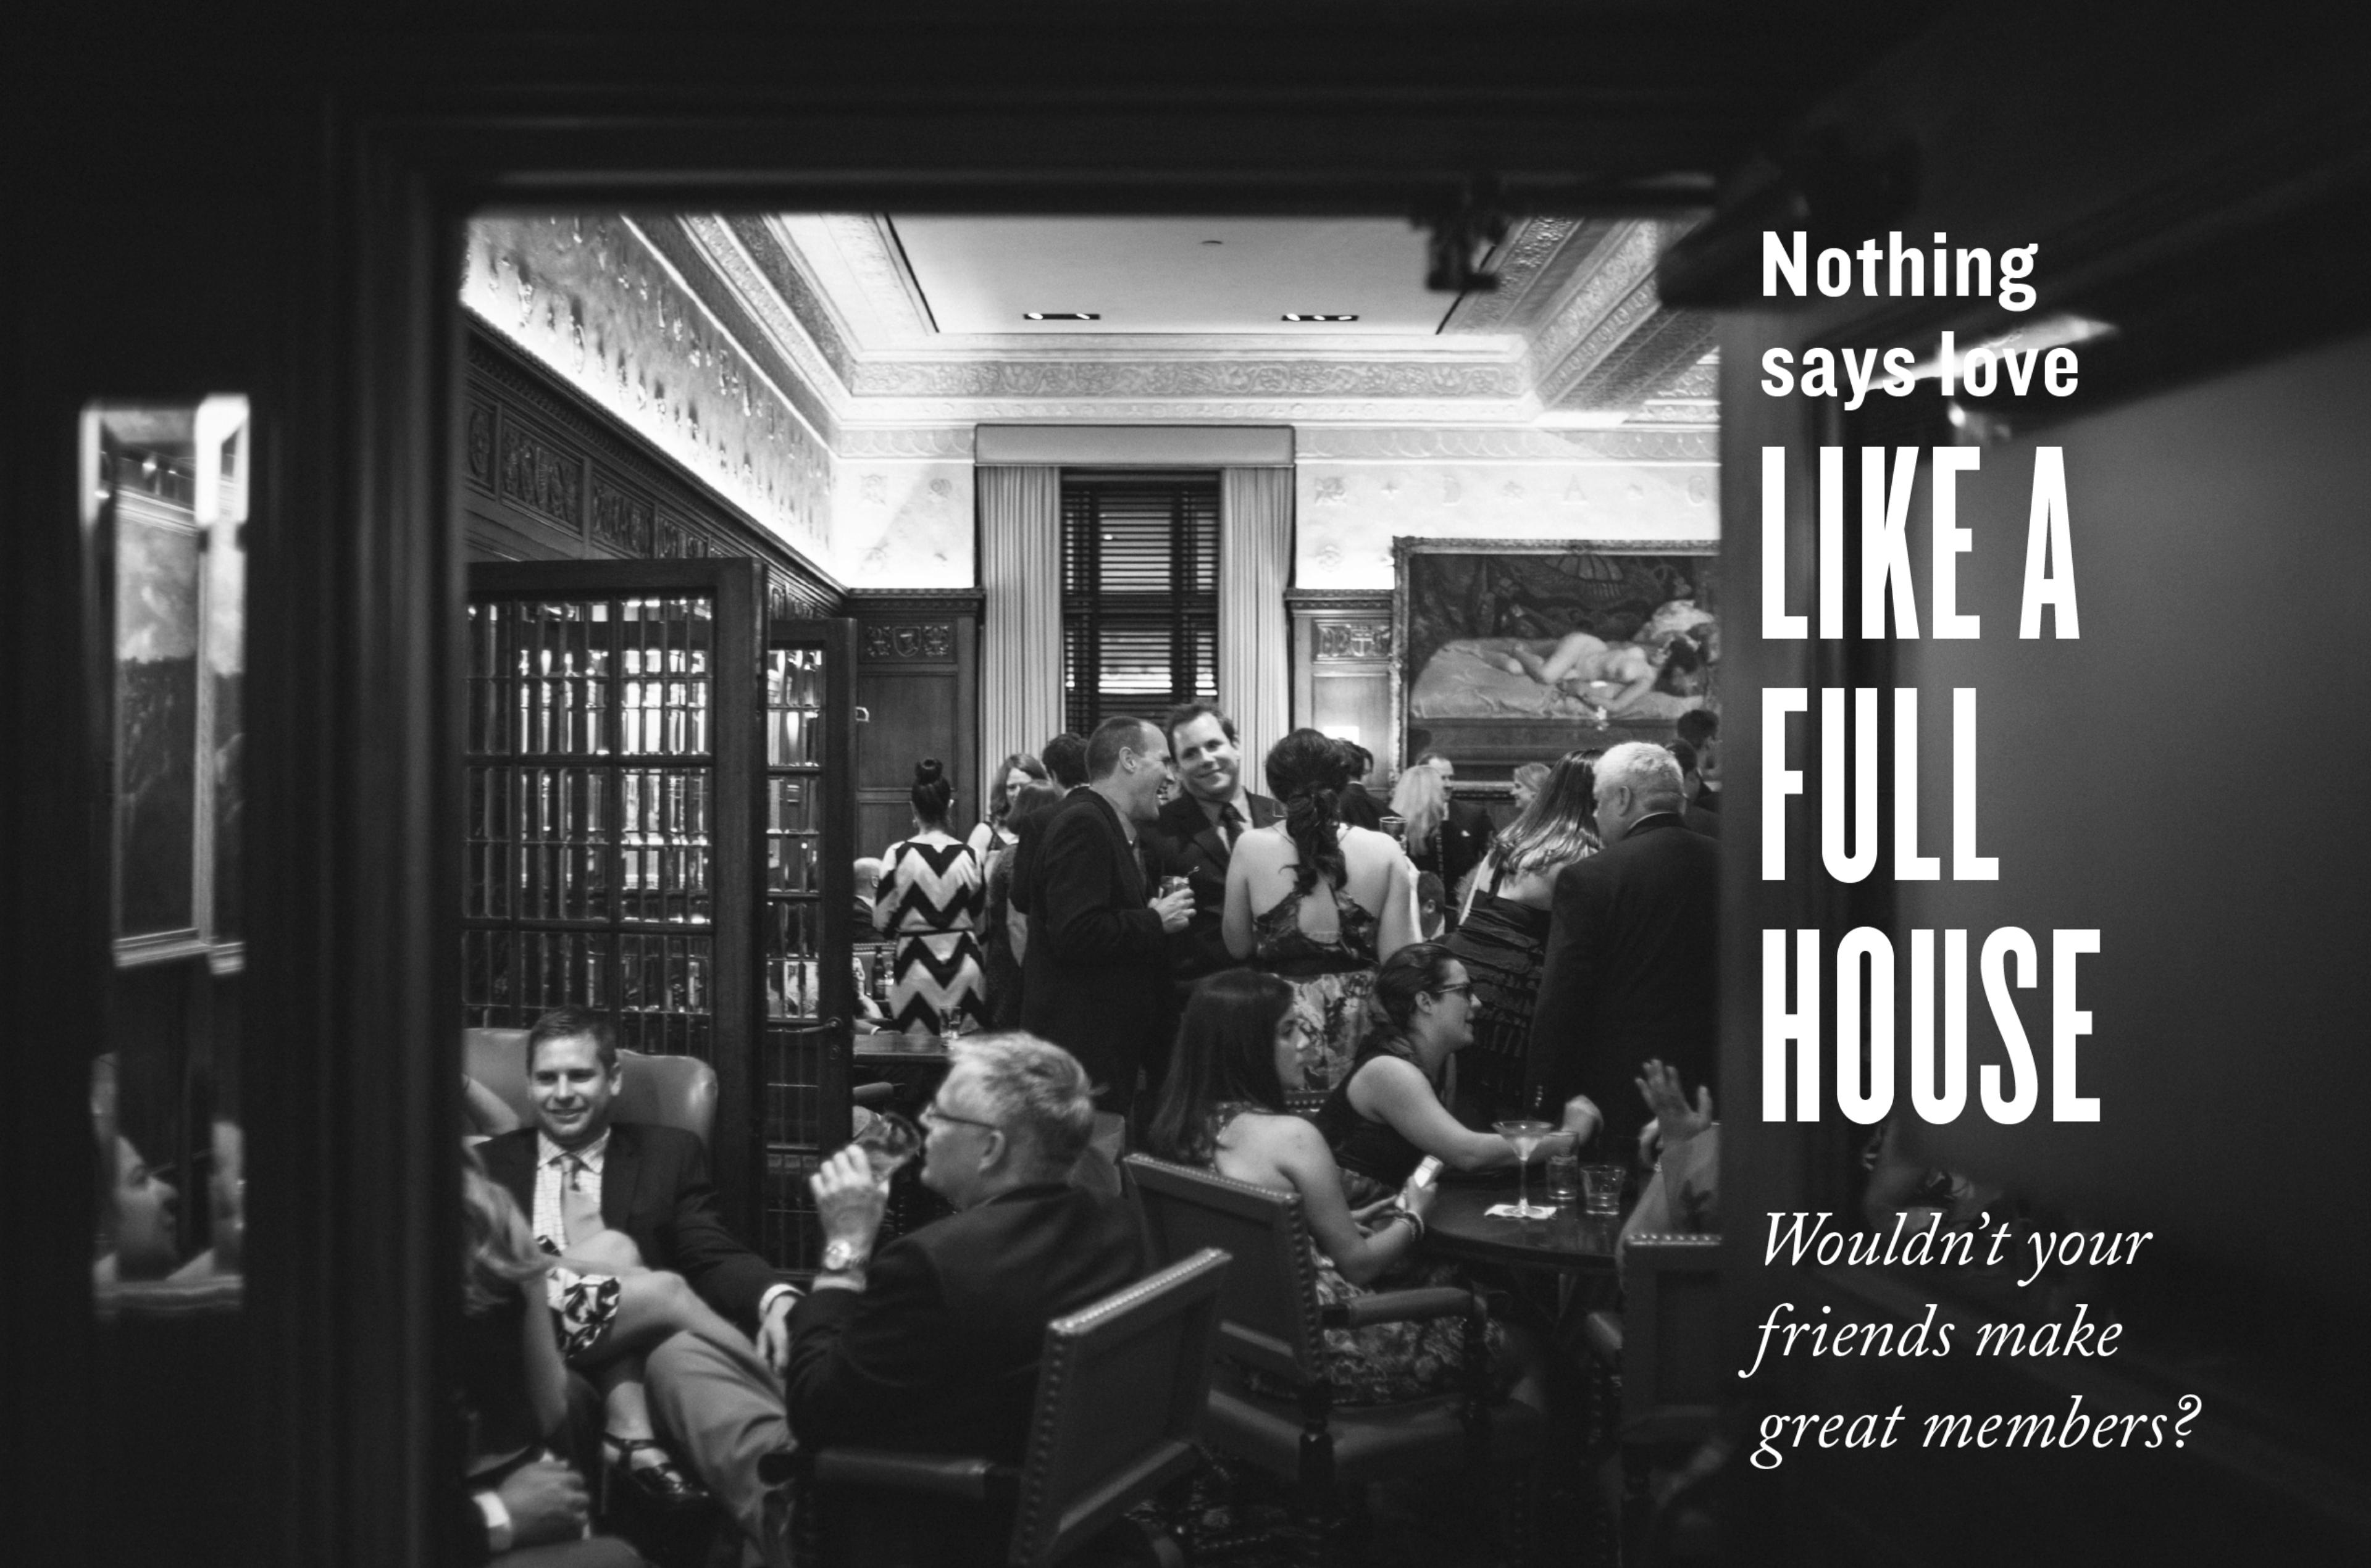 Nothing says love like a full house. Wouldn't your friends make great members?